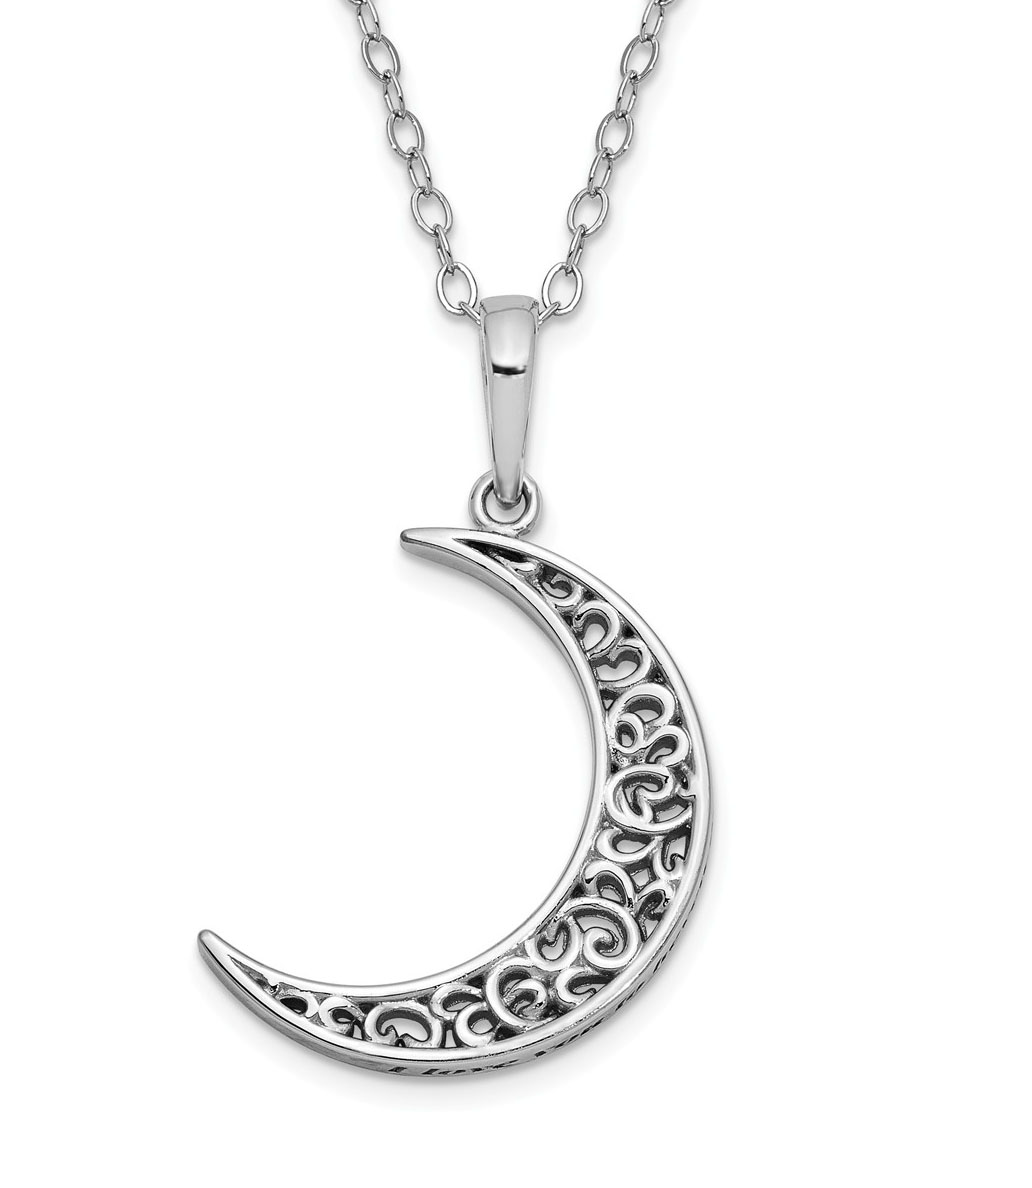 Antiqued 'I Love You To Heaven and Back' Pendant Necklace, Rhodium-Plated Sterling Silver.